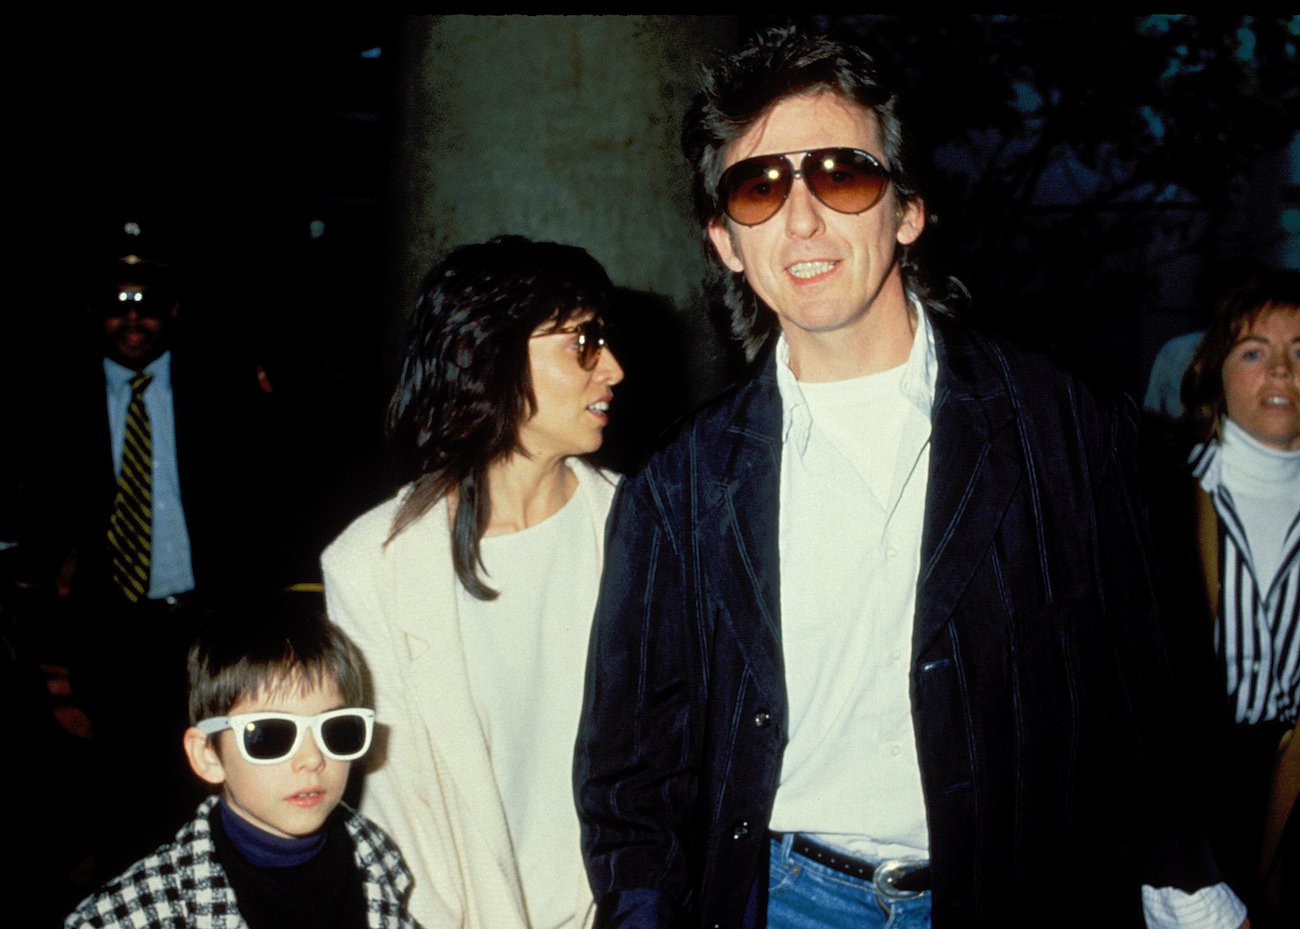 George Harrison, his wife Olivia, and their son Dhani, at LAX Airport in 1988.